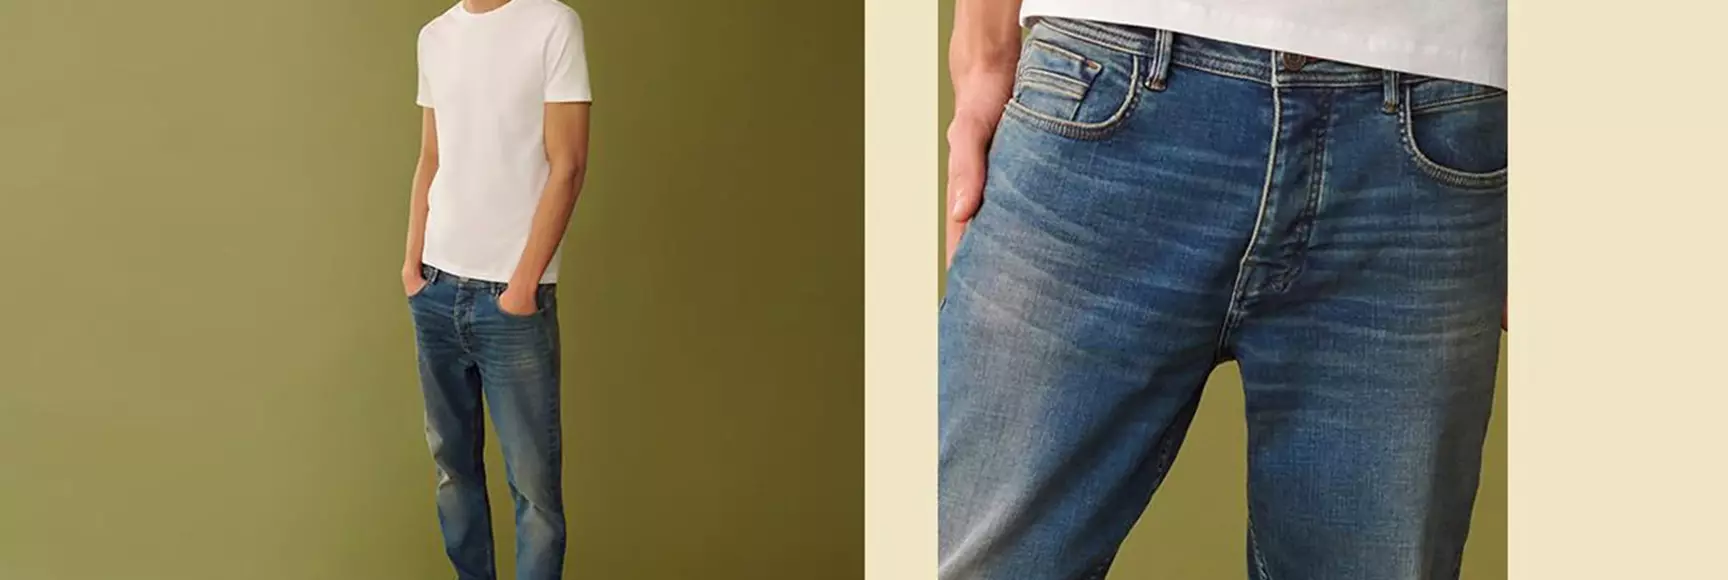 Primark’s men’s slim faded jeans deliver soft, easy stretch and a wider fit window thanks to LYCRA® FREEF!T® technology.